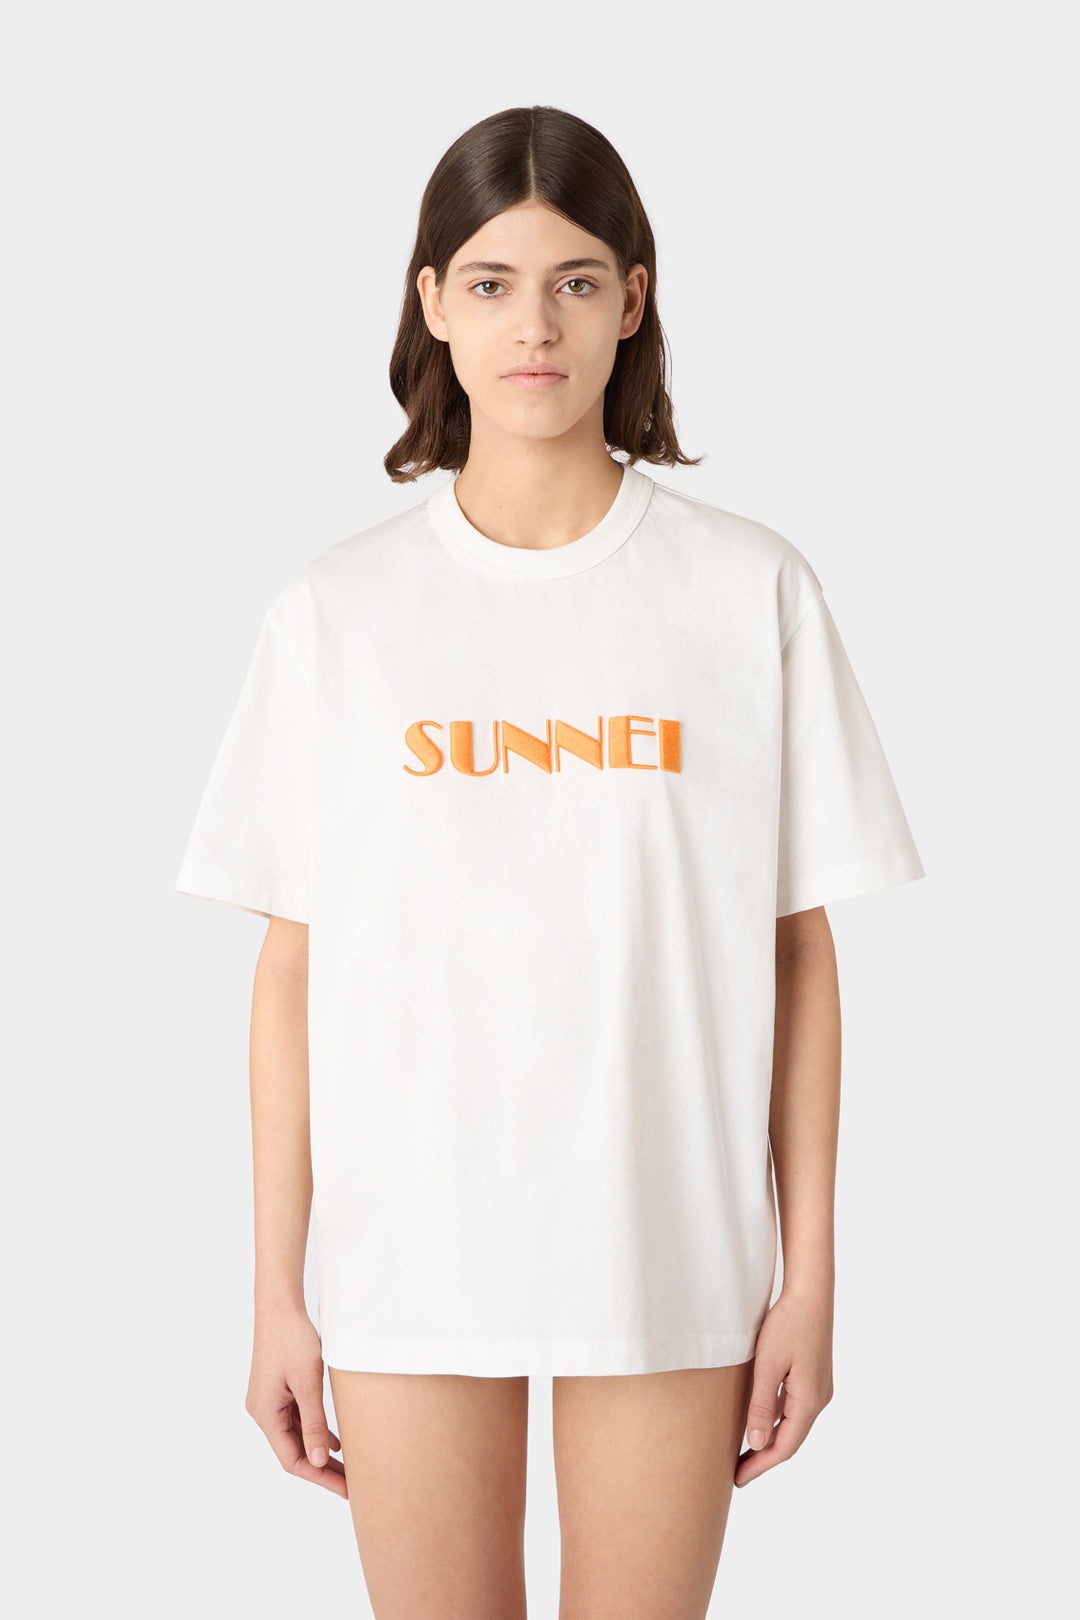 EMBROIDERED BIG LOGO T-SHIRT / off-white & peach - 3